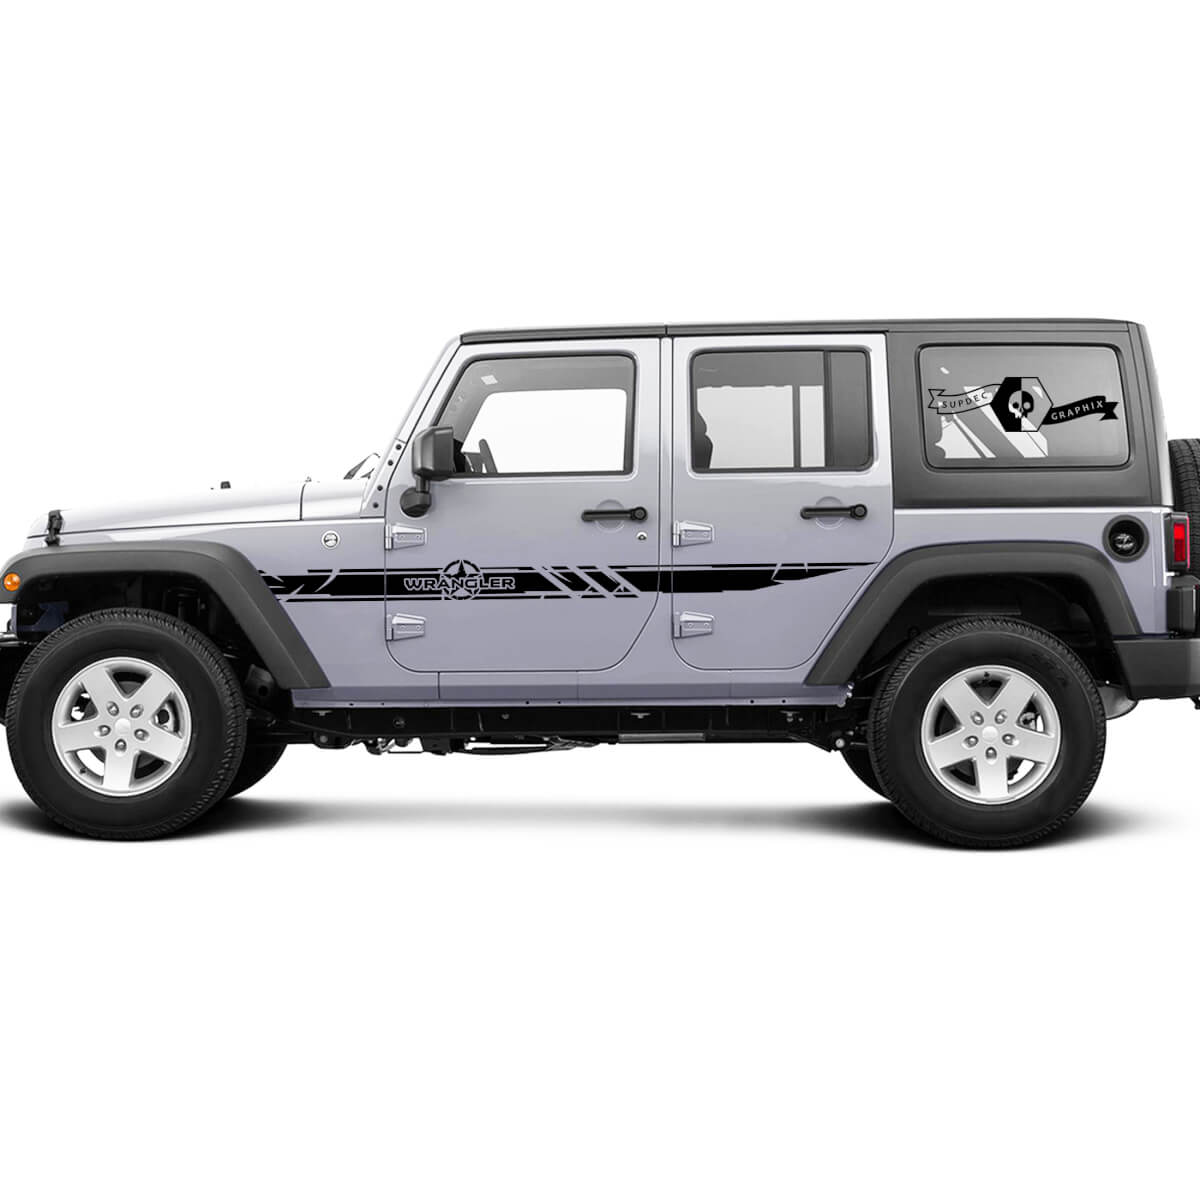 2 Side Jeep Wrangler Destroyed Military Army Star Doors Side Vinyl Decals Graphics Sticker